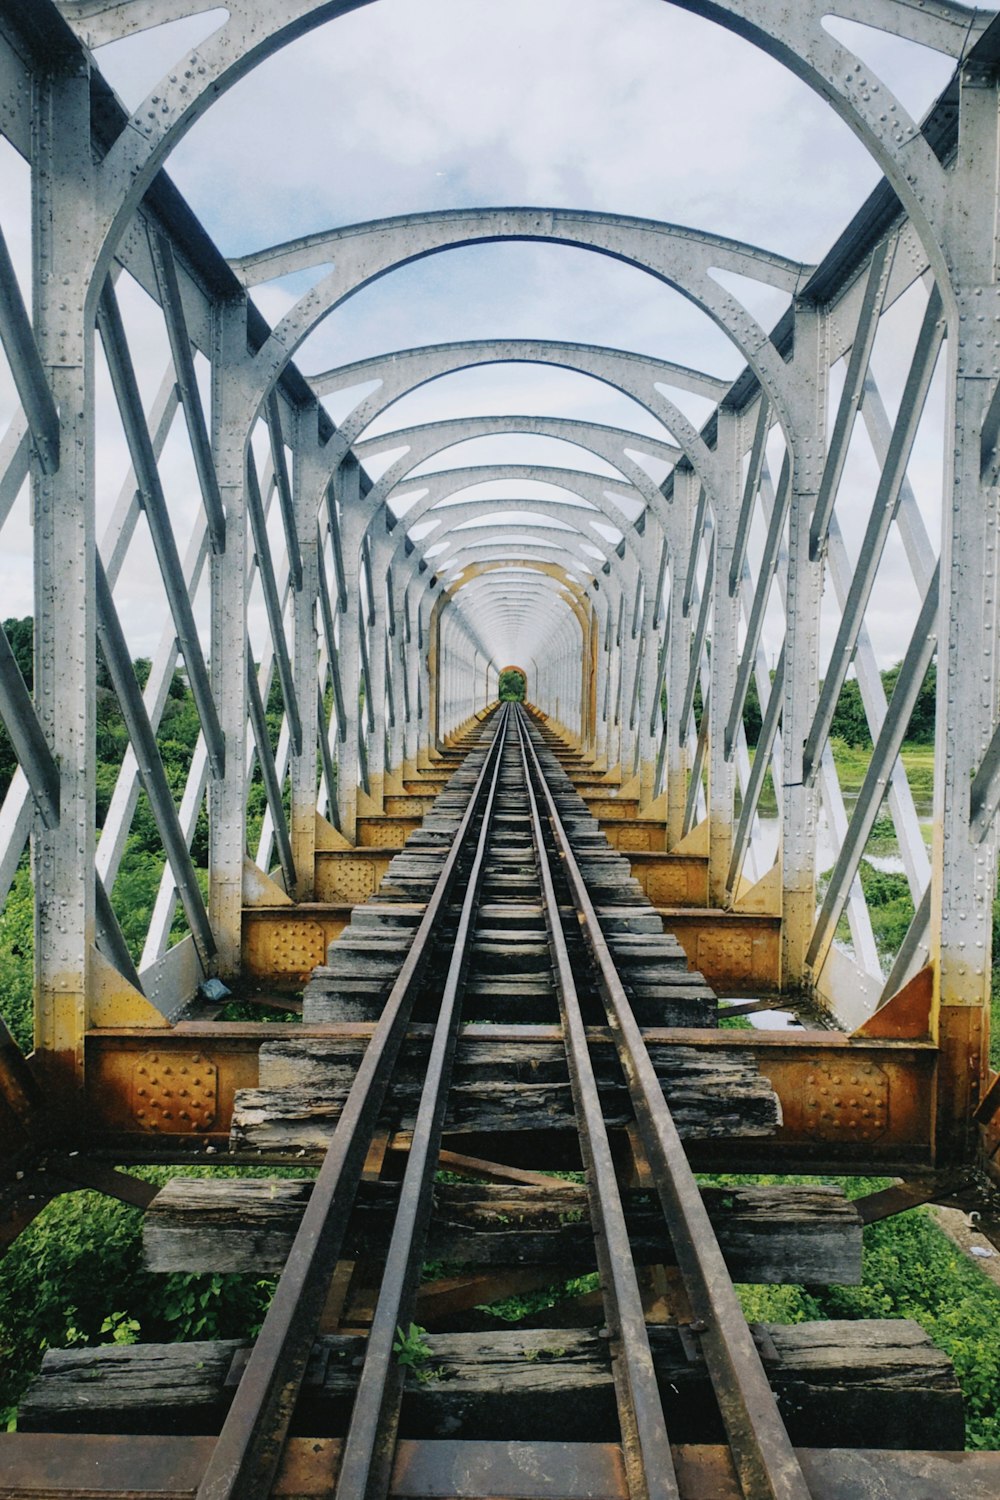 a view of a train track from the top of a bridge